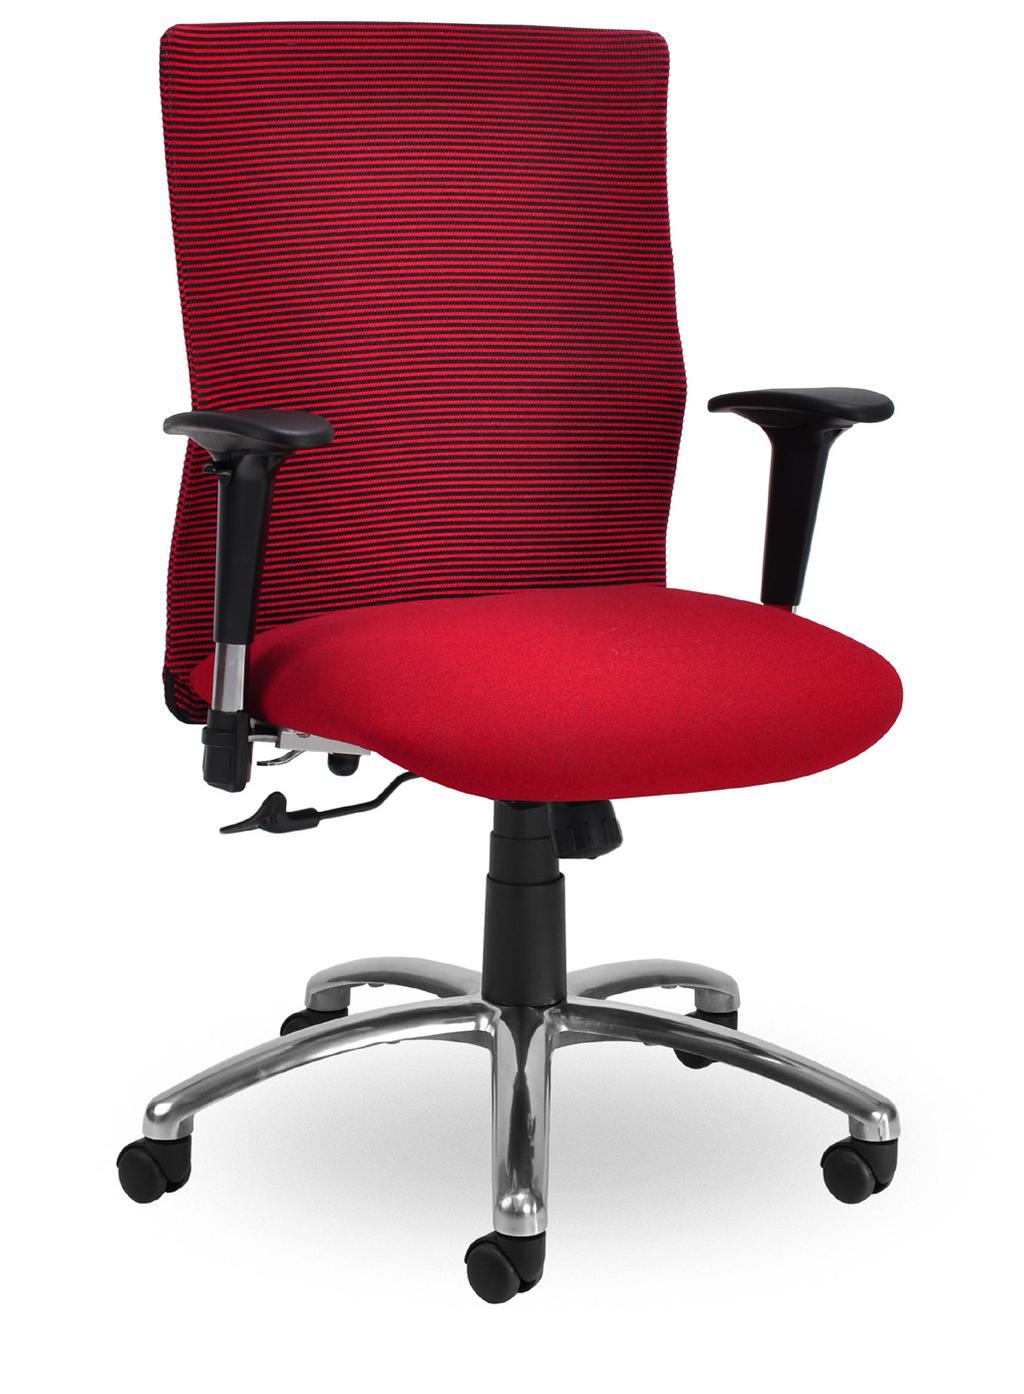 adjustable arms with sliding gel pads and upholstered back (JA210 Q25 TE JHUB); Jay high